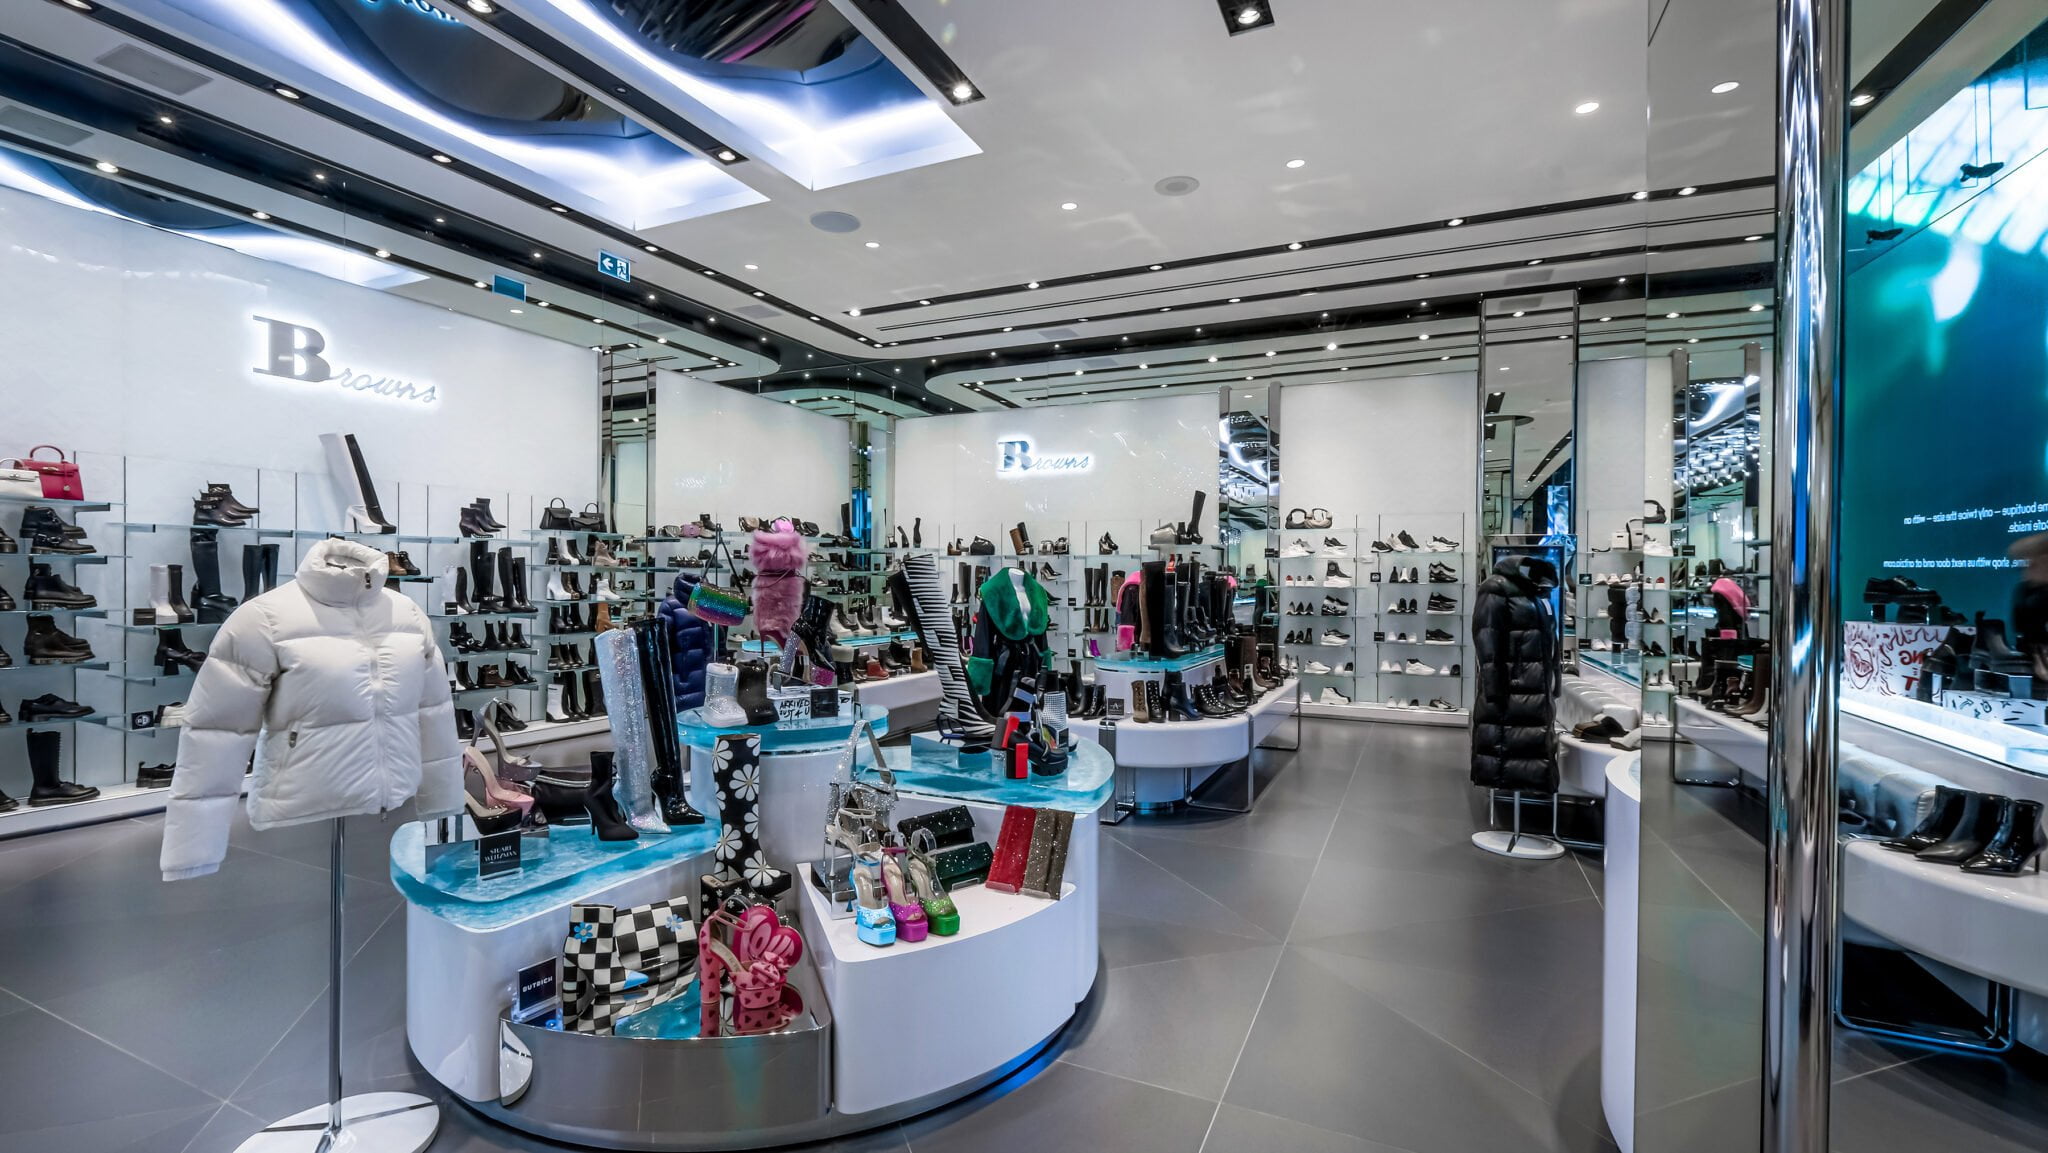 Browns Shoes Opens Impressive Flagship Store at Toronto’s Yorkdale